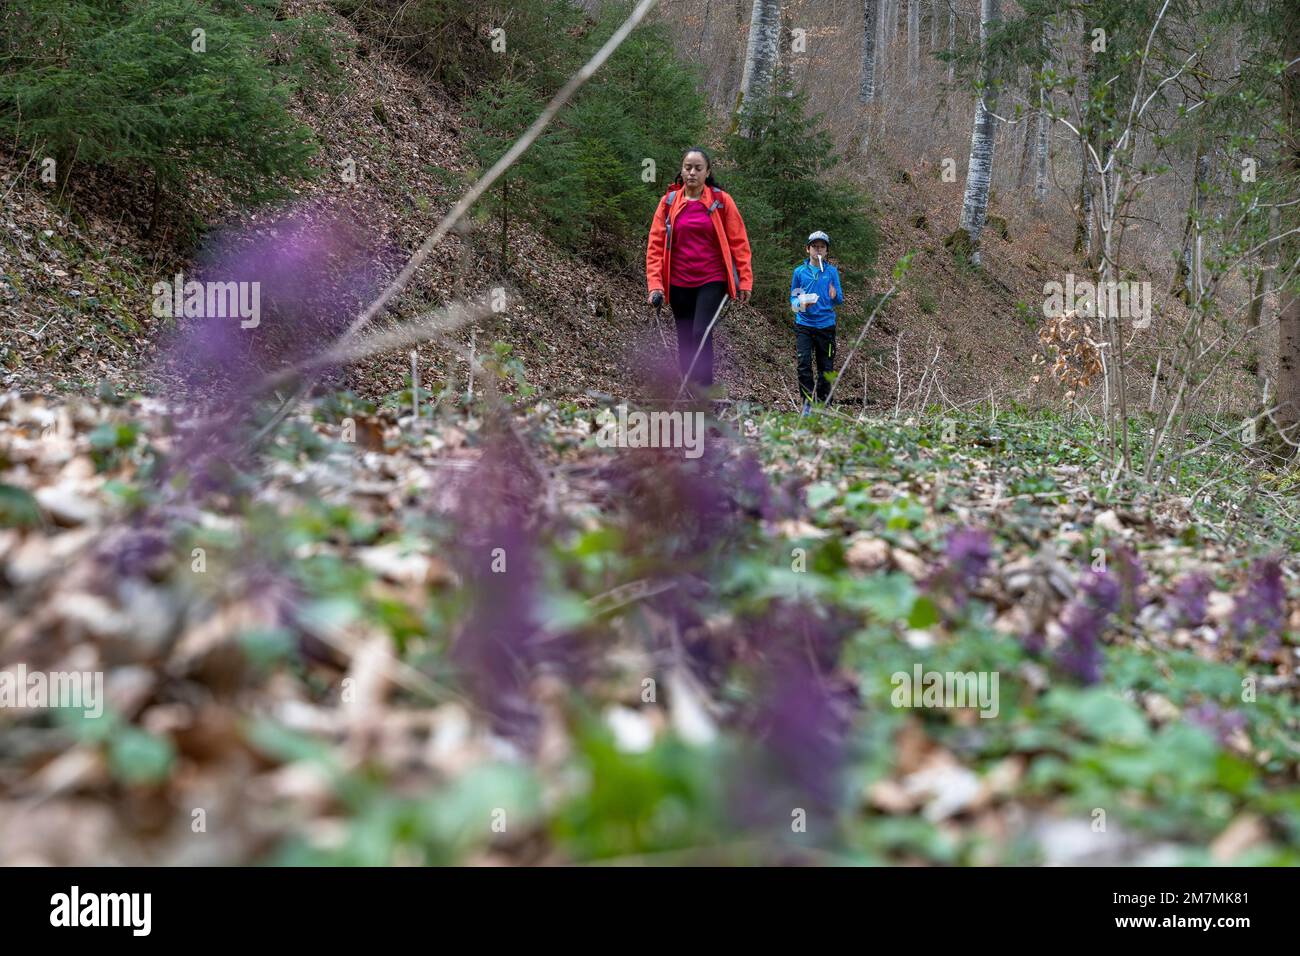 Europe, Germany, Southern Germany, Baden-Württemberg, Danube Valley, Sigmaringen, Beuron, mother and son hiking in the forest Stock Photo